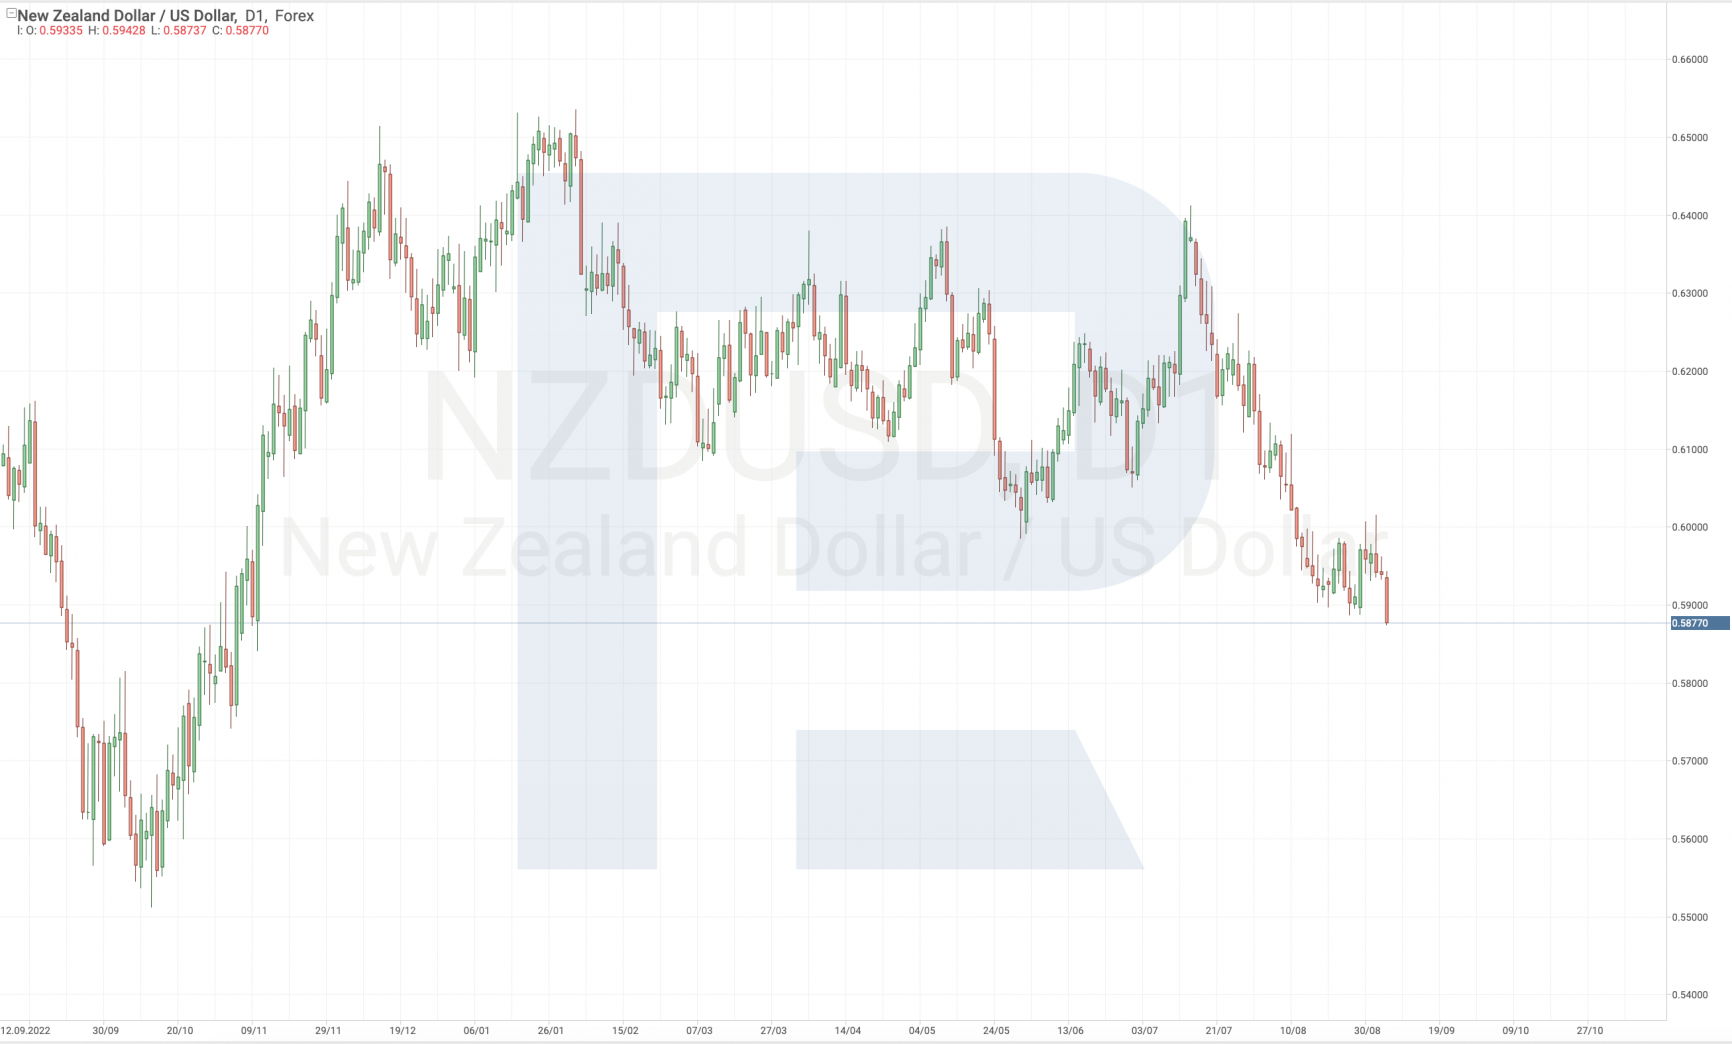 NZD/USD currency pair chart